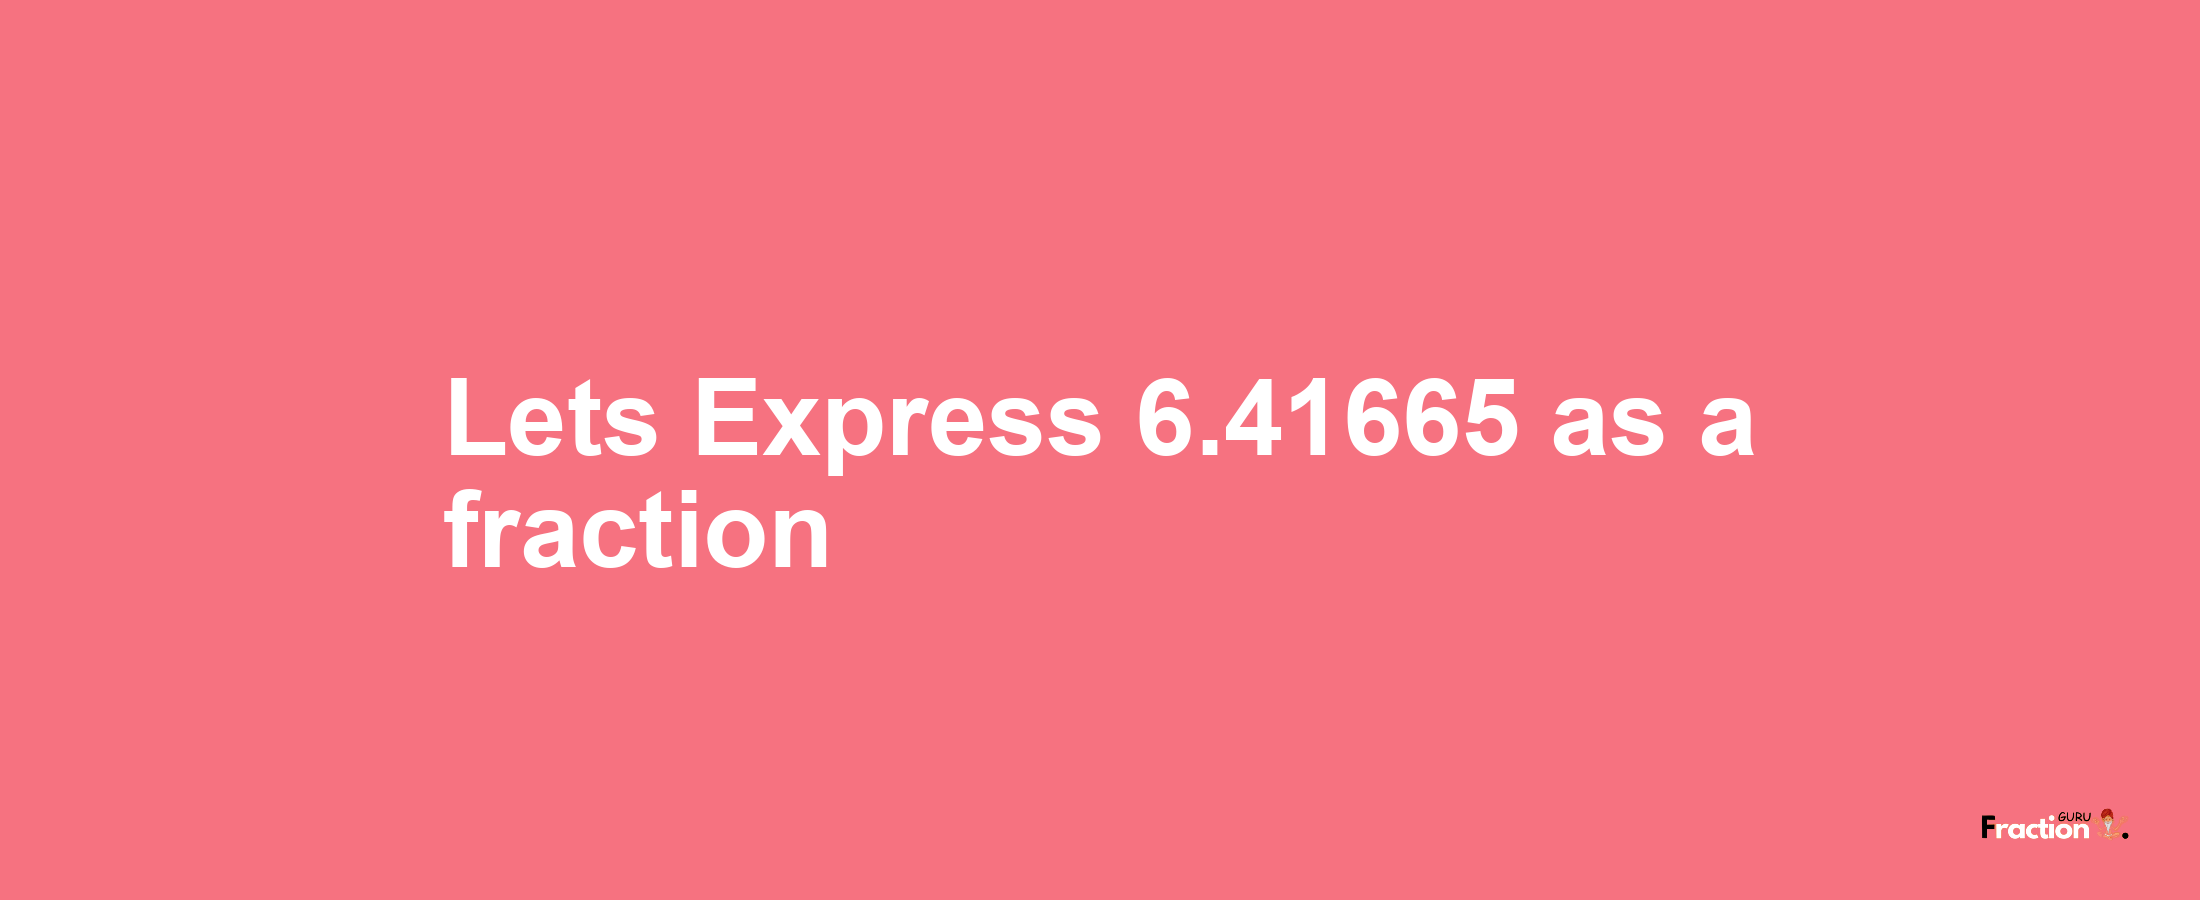 Lets Express 6.41665 as afraction